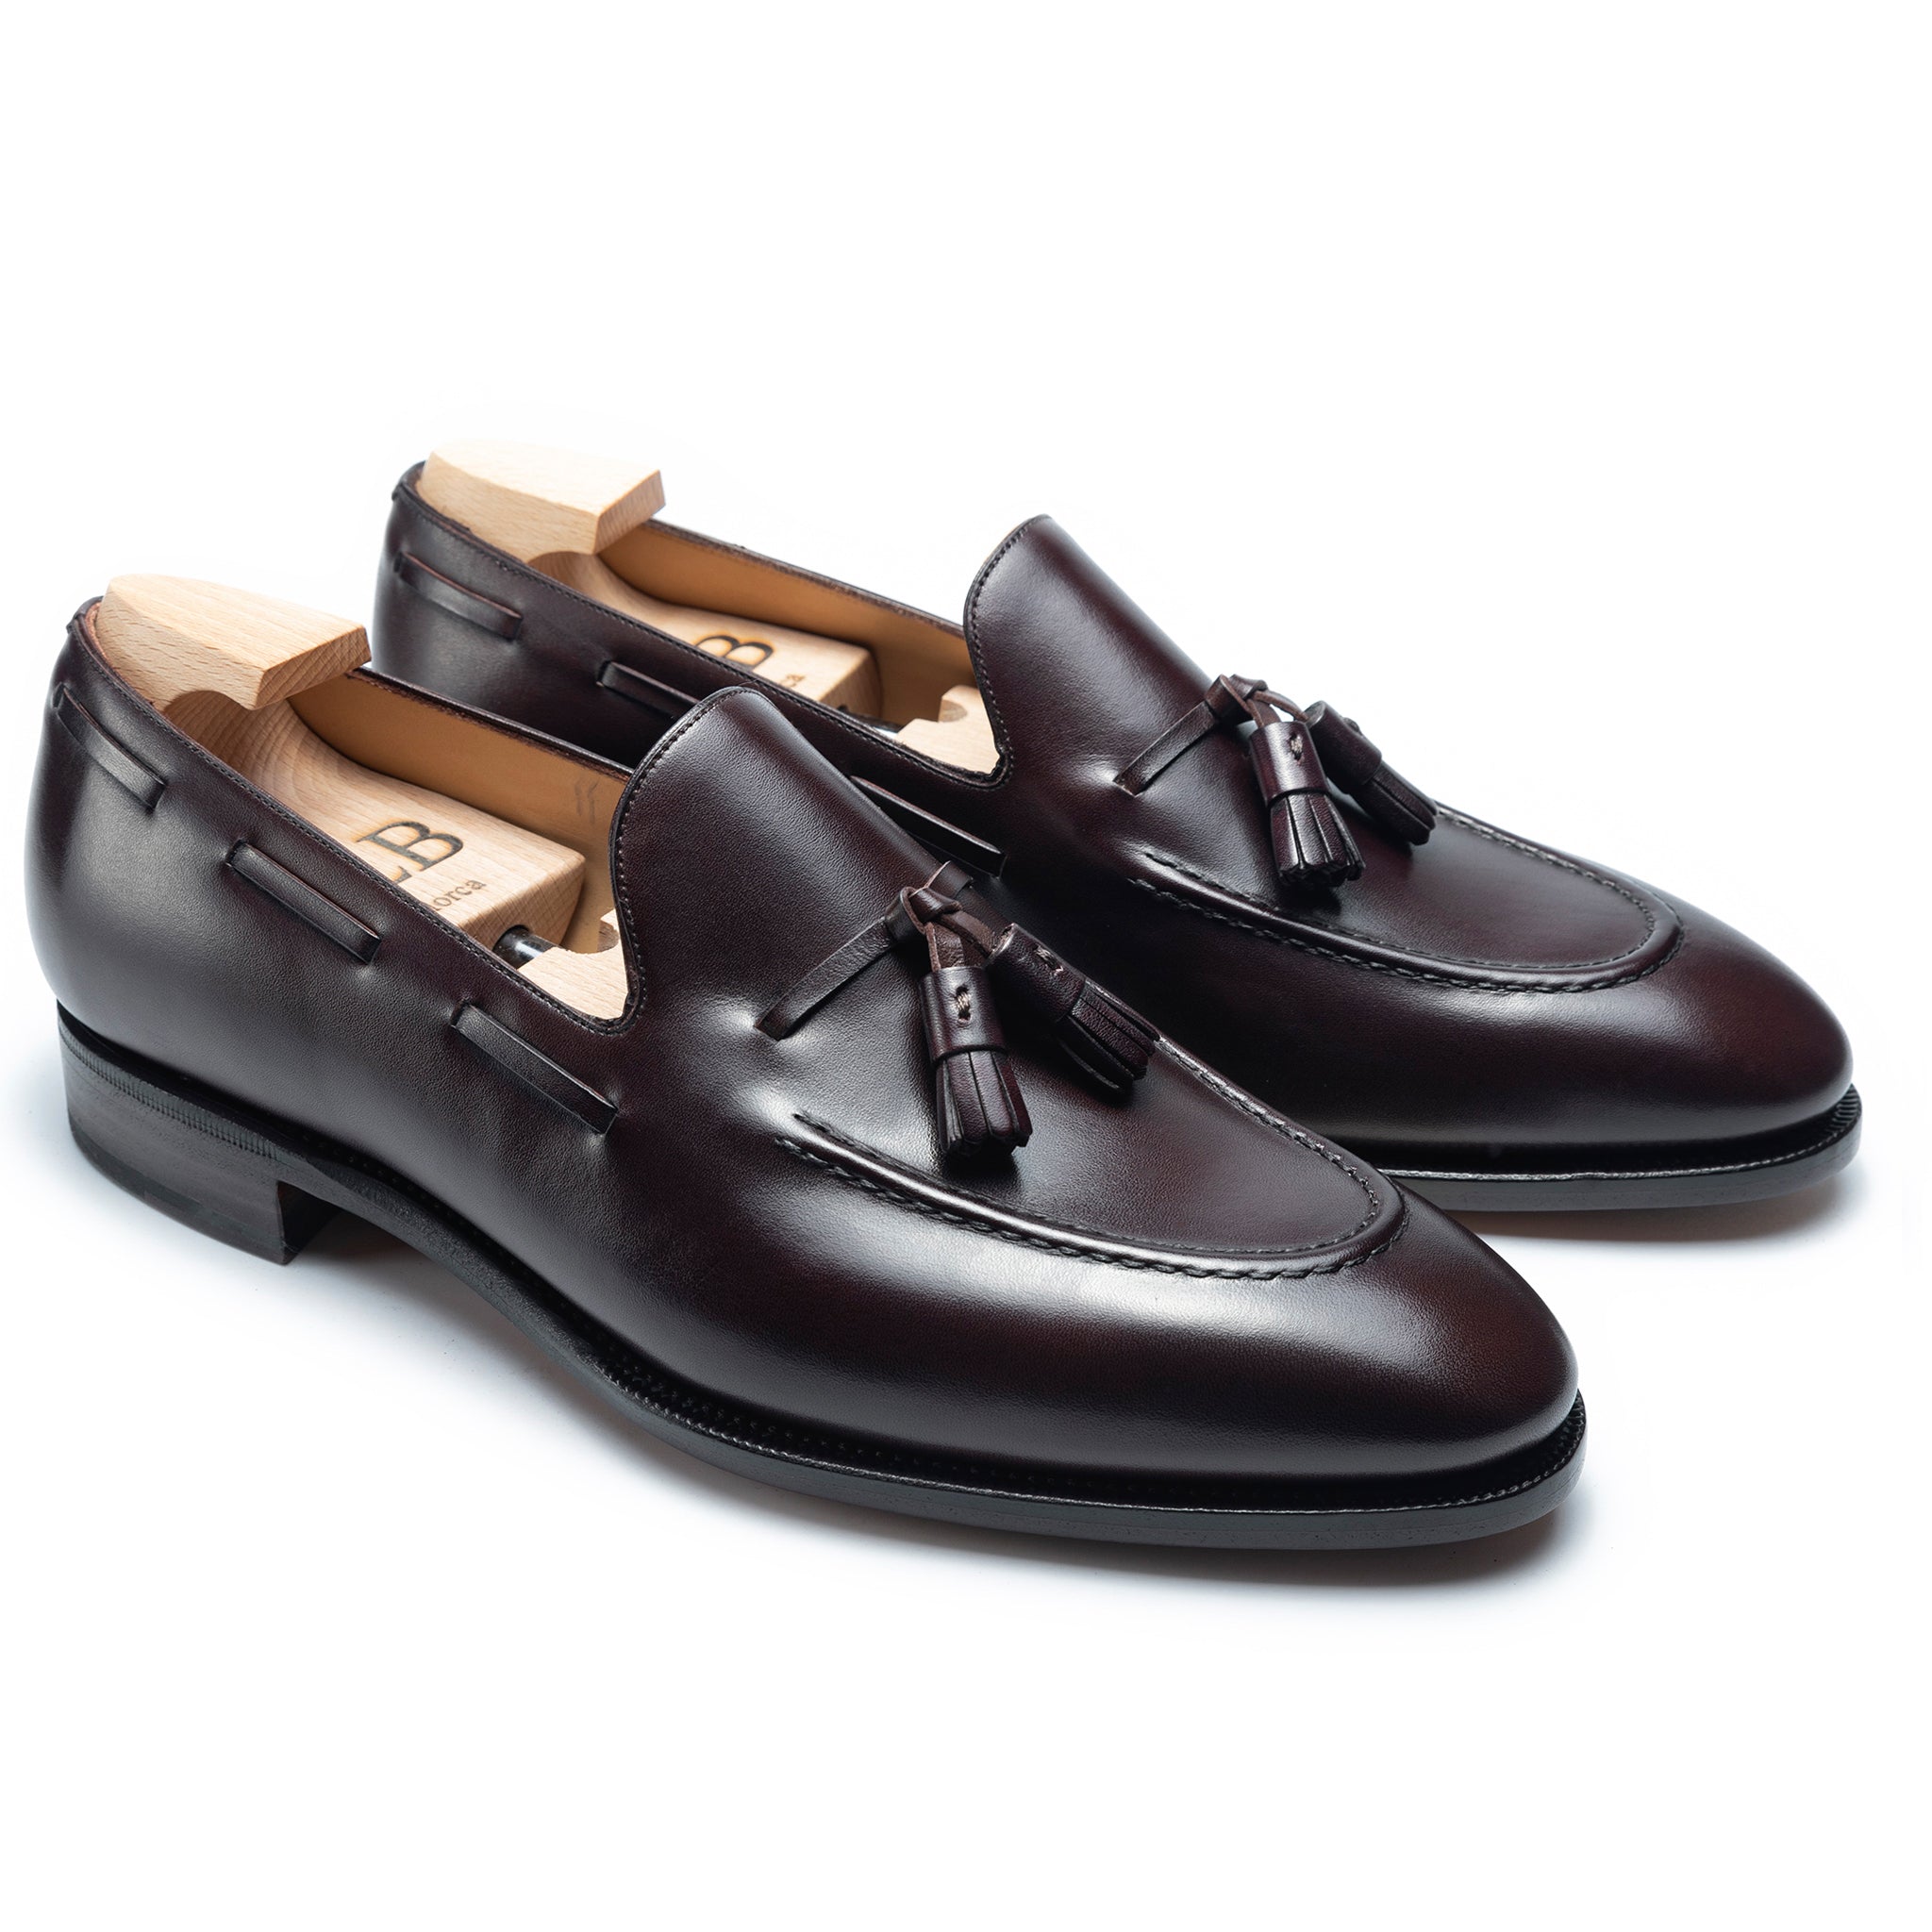 TLB Mallorca | Men's Leather loafers | Men's leather shoes | Goya ...